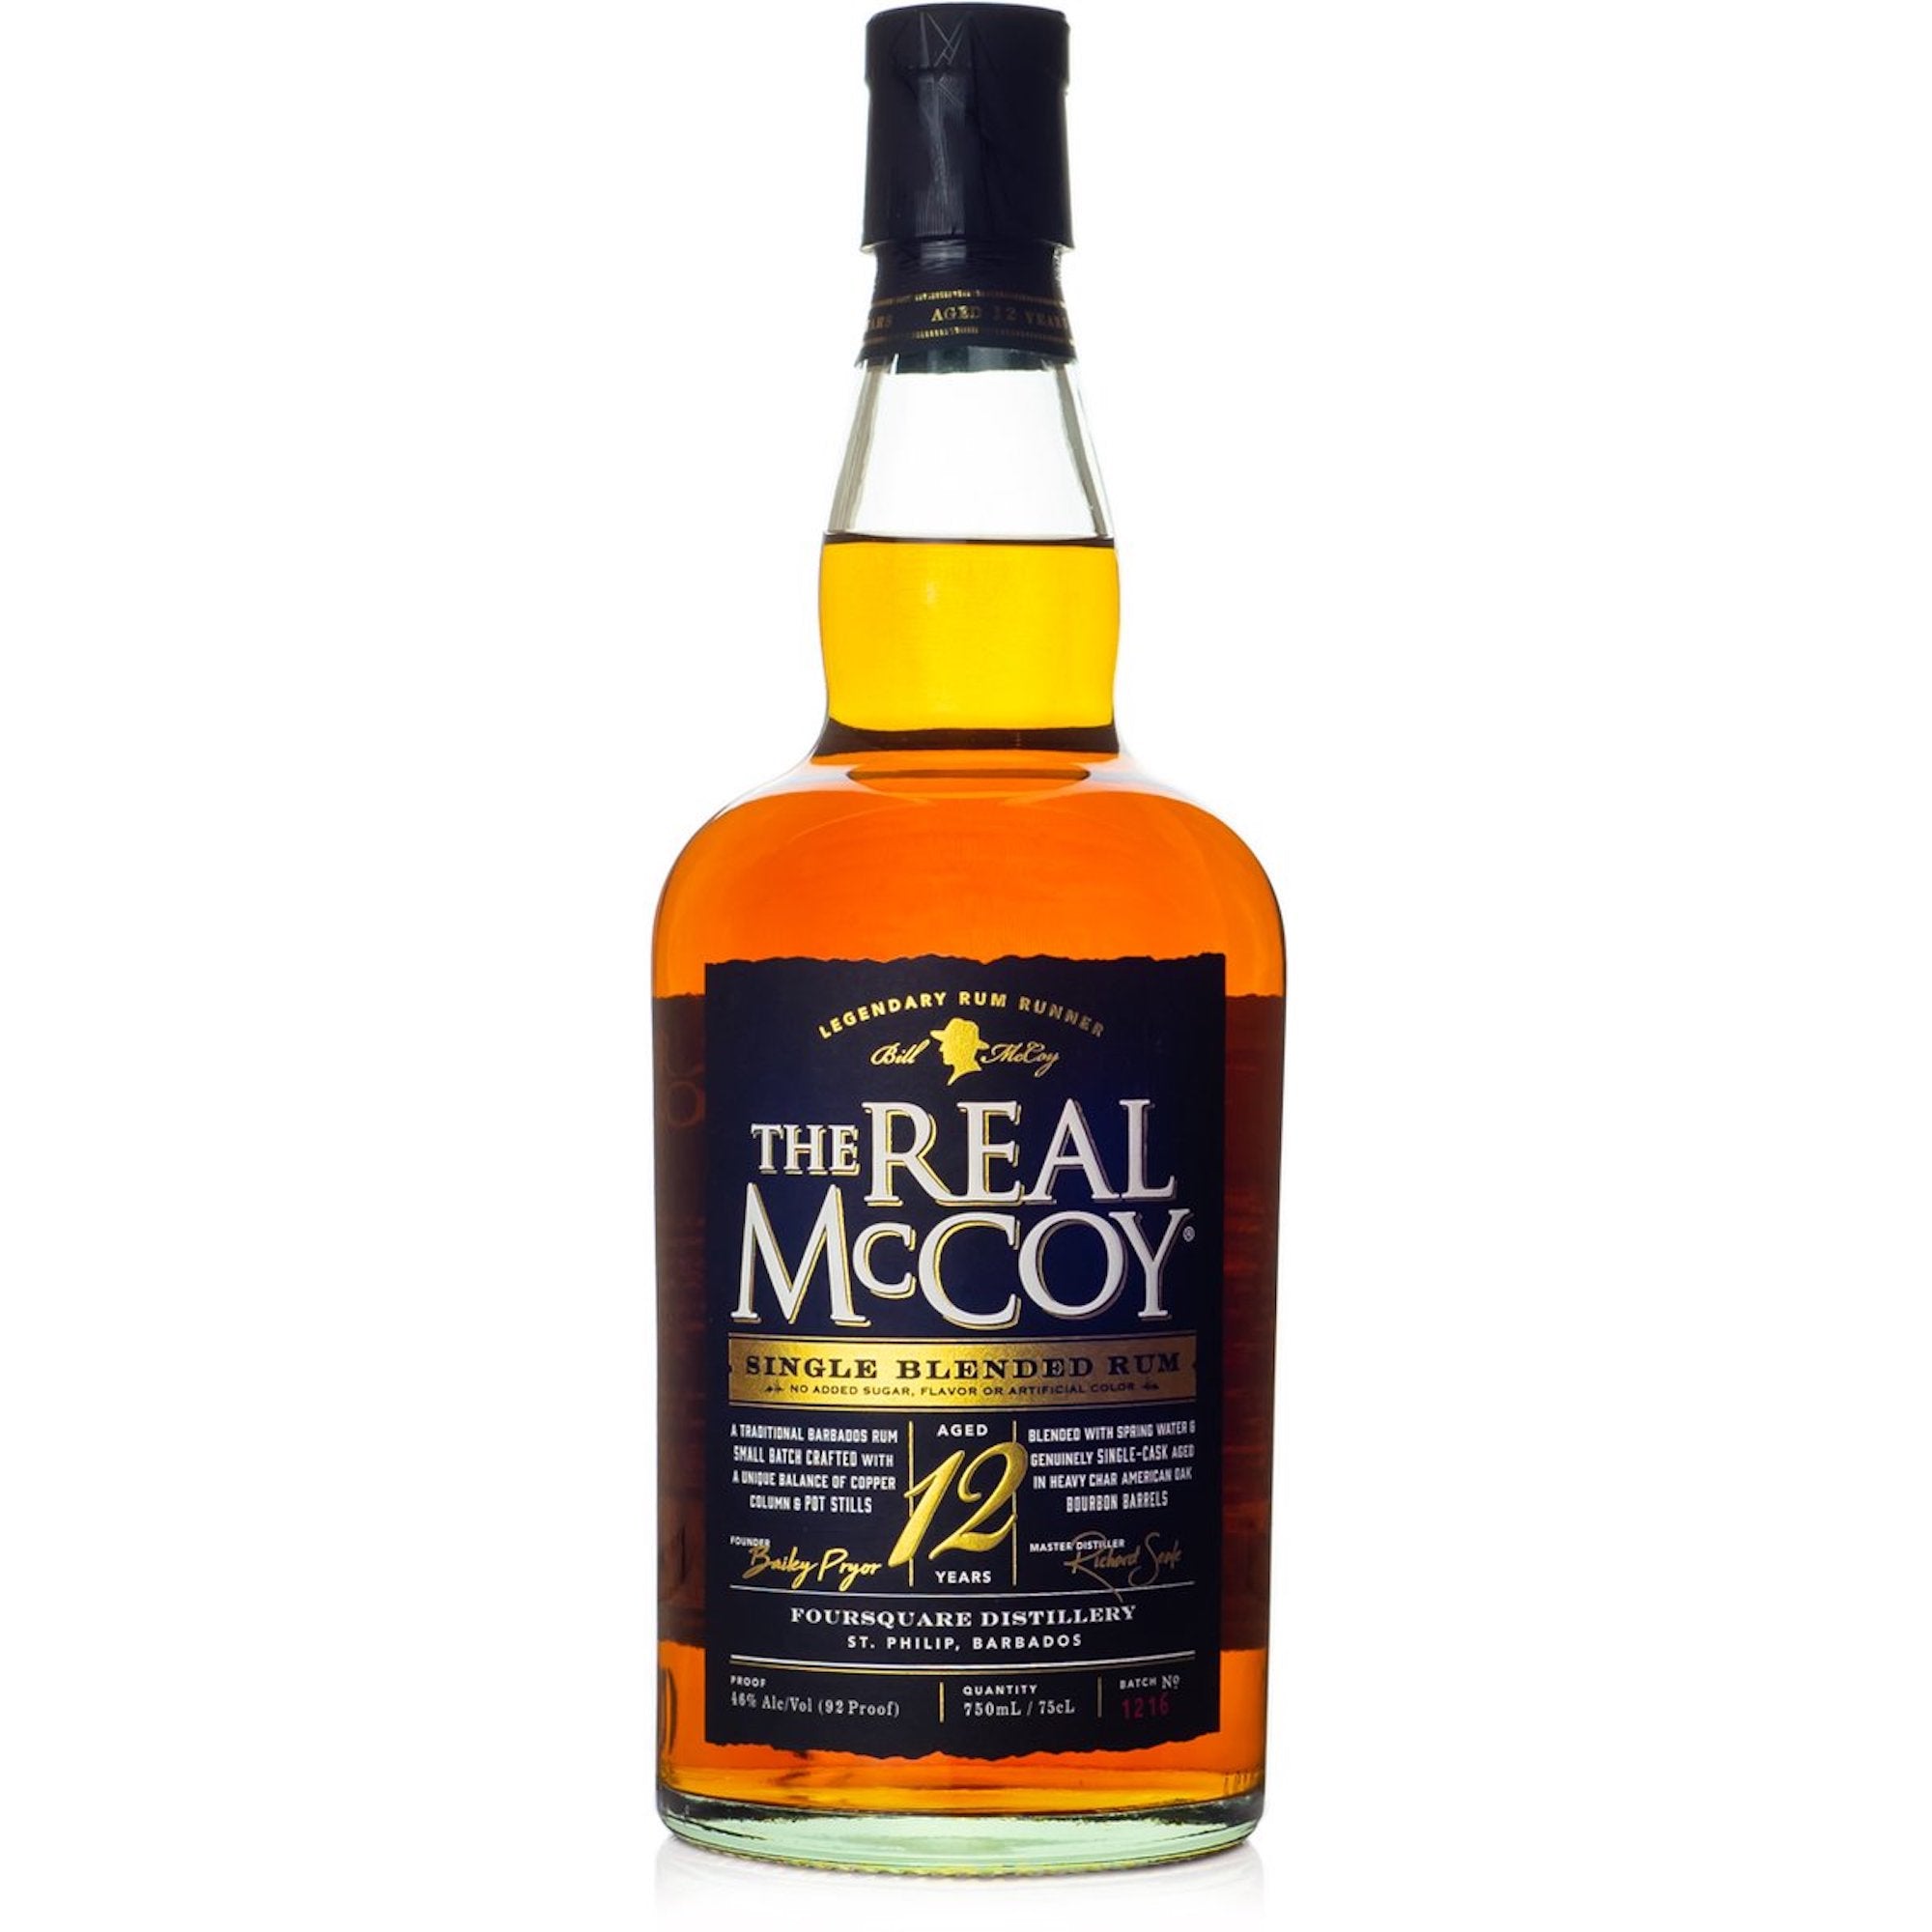 The Real McCoy 12 Years Aged Super Premium Rum